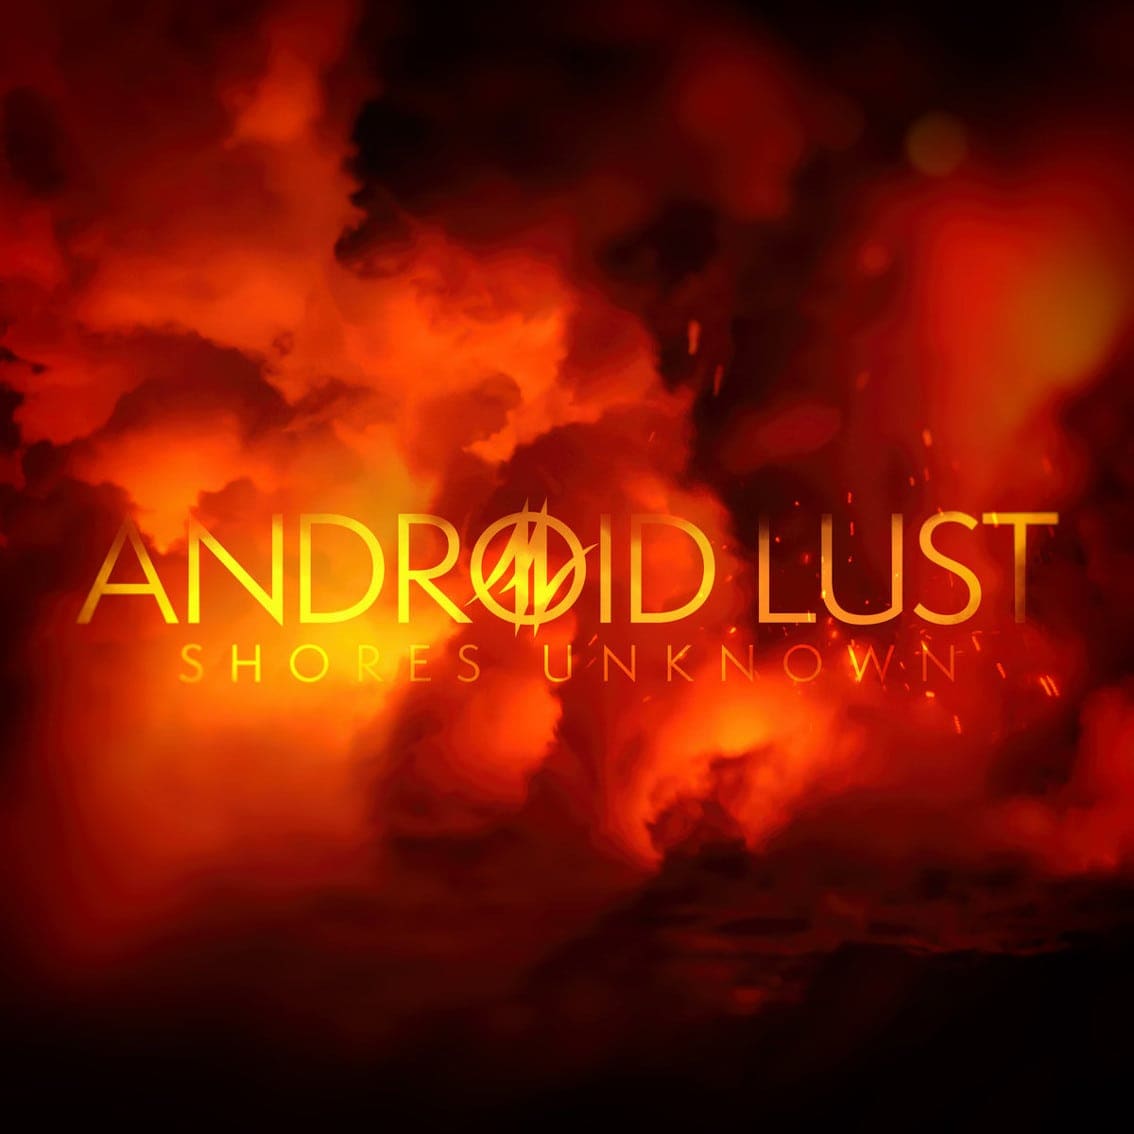 Android Lust self-releases new EP 'Shores Unknown' - preview here